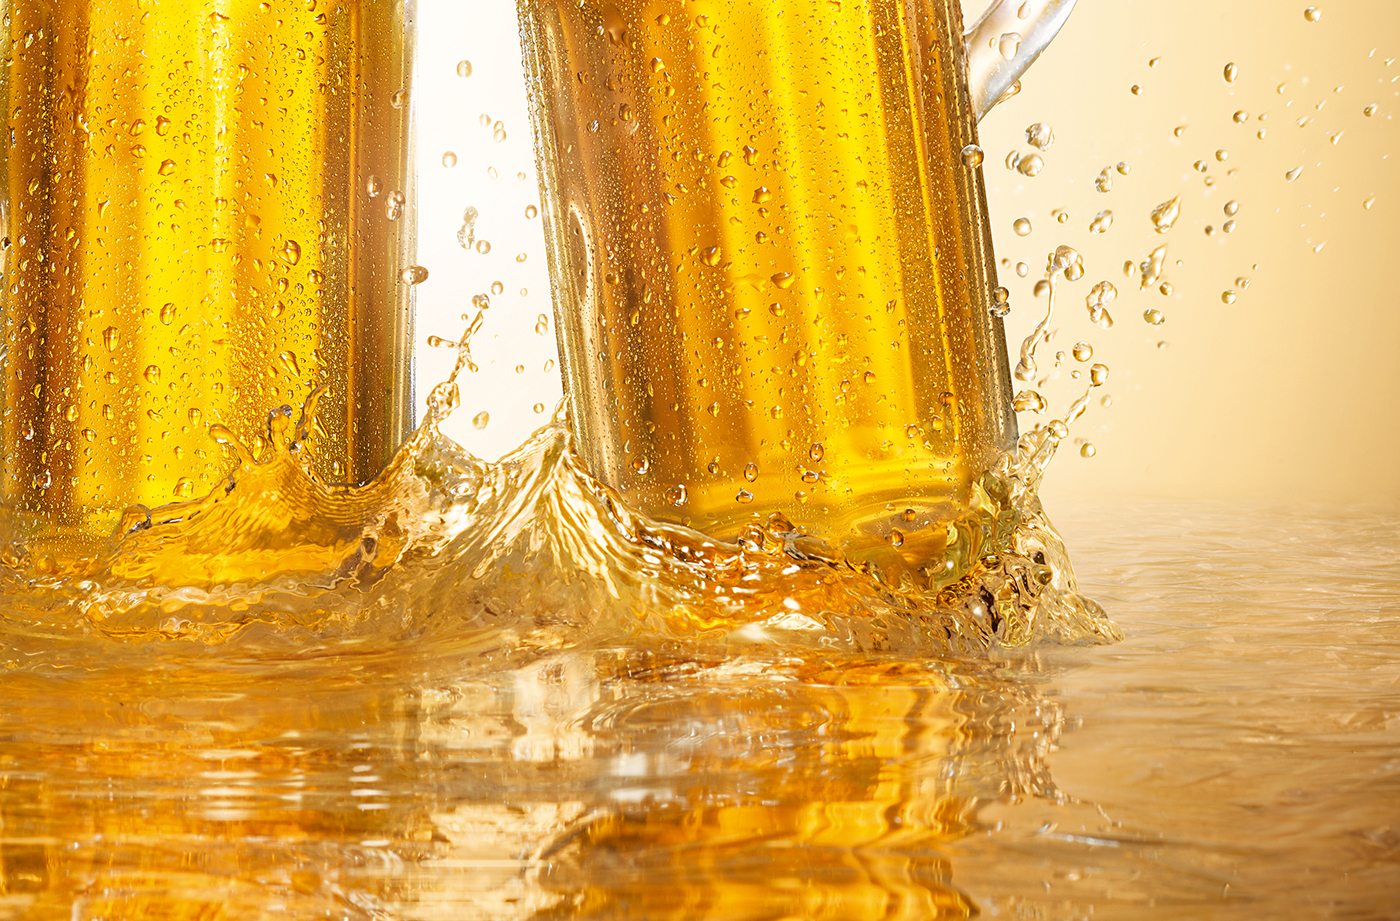 beer retouch splash water explosion creative wave glass Realism yellow advertise digital studio Post Production drink